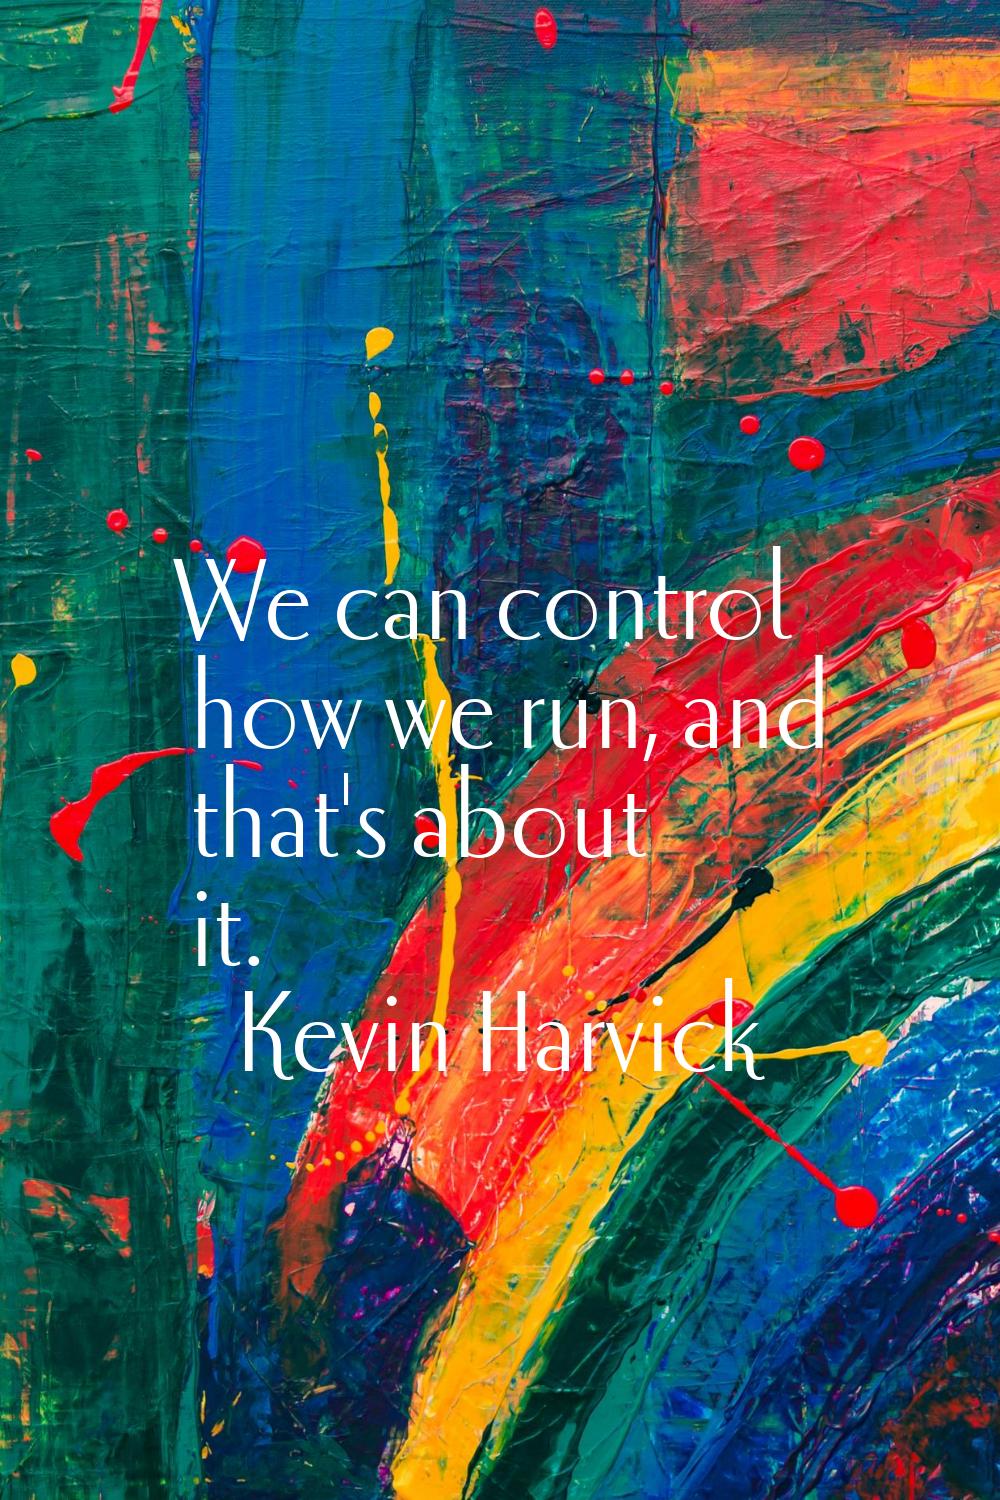 We can control how we run, and that's about it.